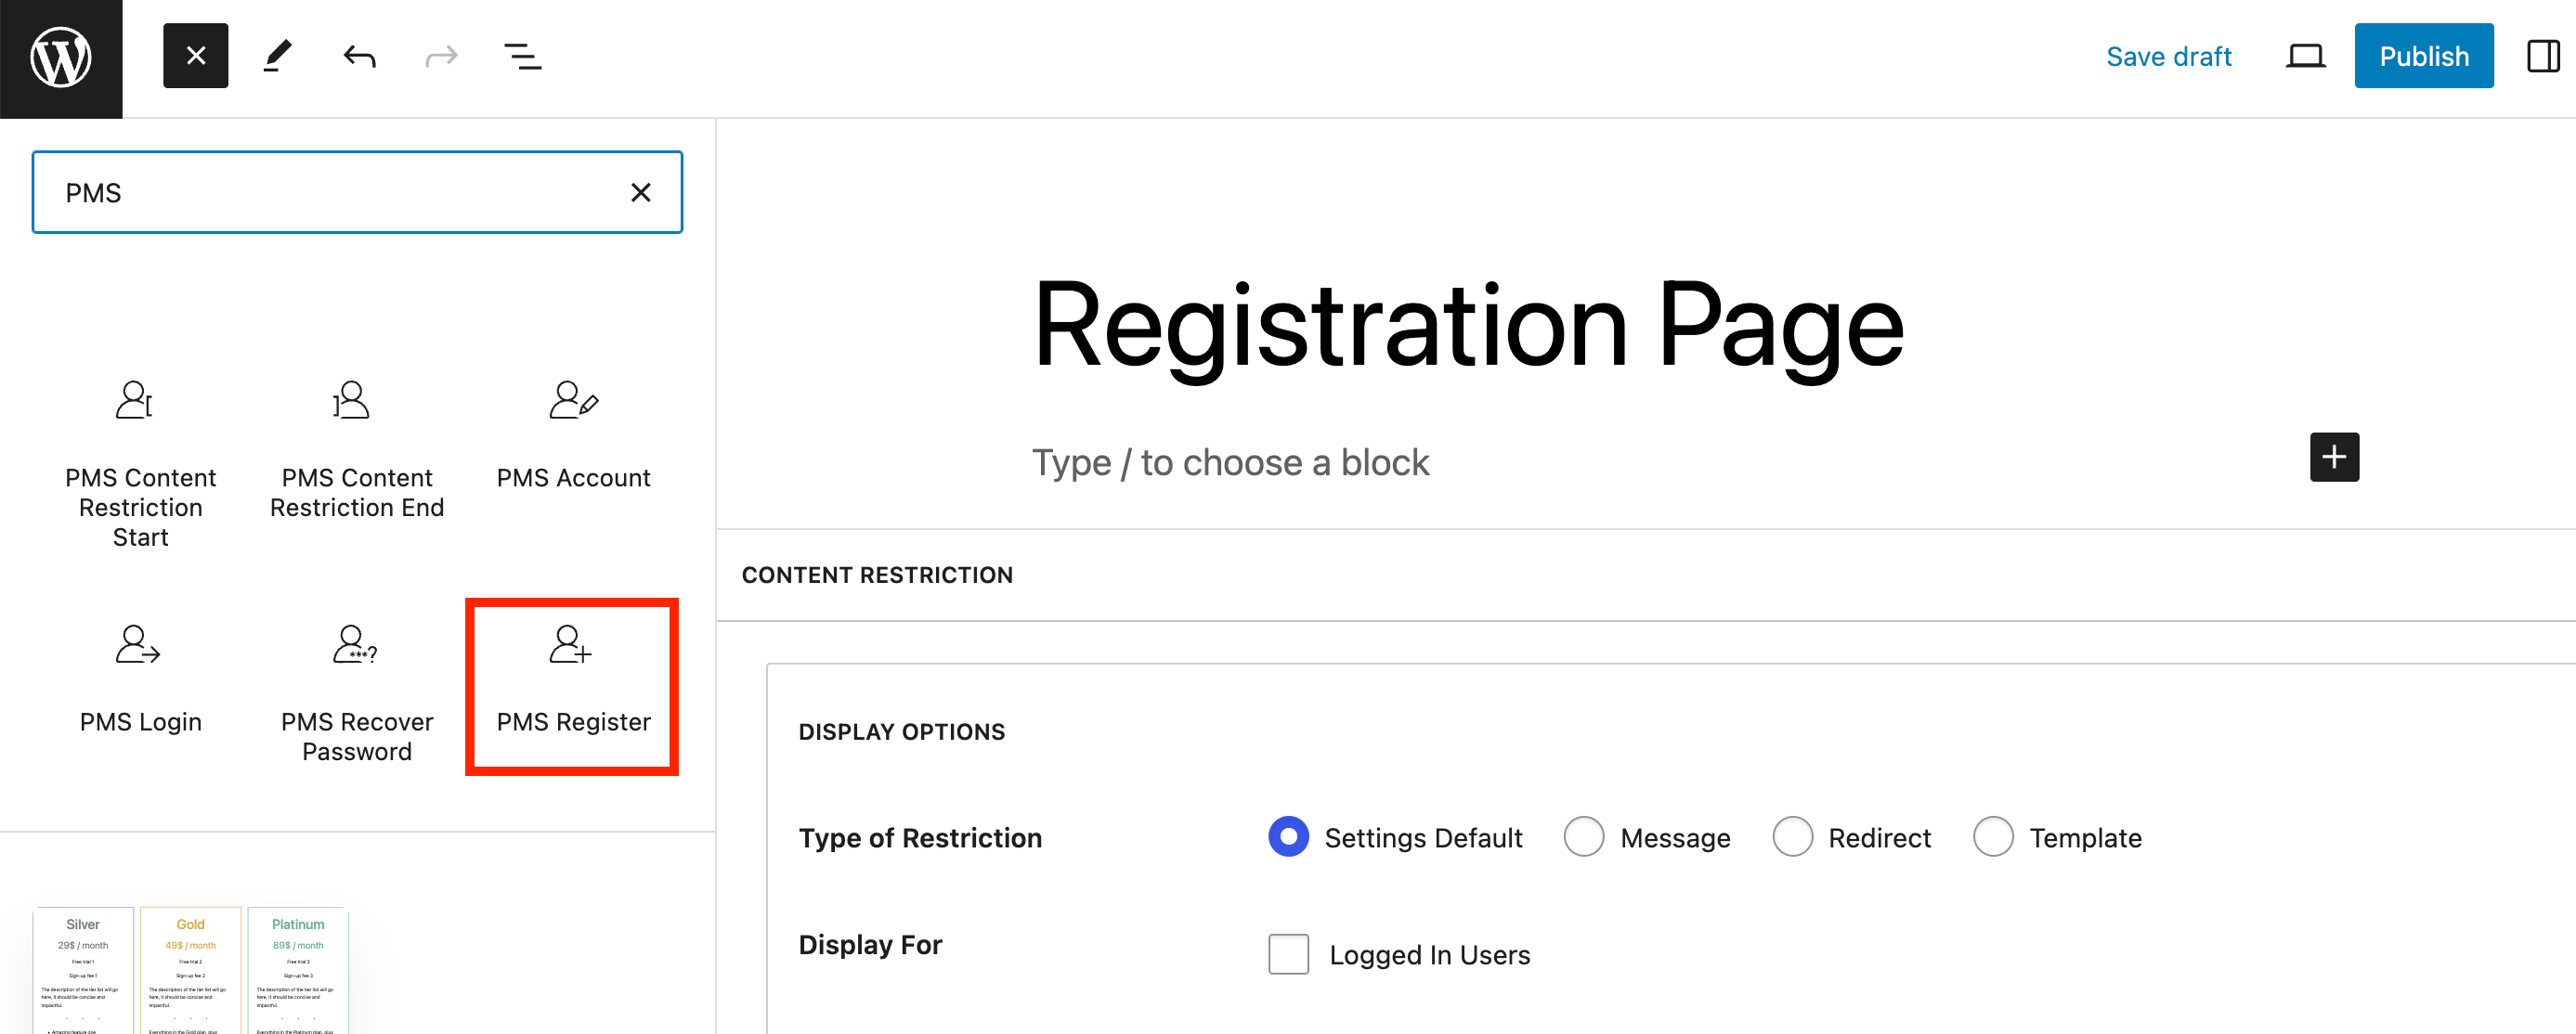 The PMS Register block allows you to password protect content in WordPress